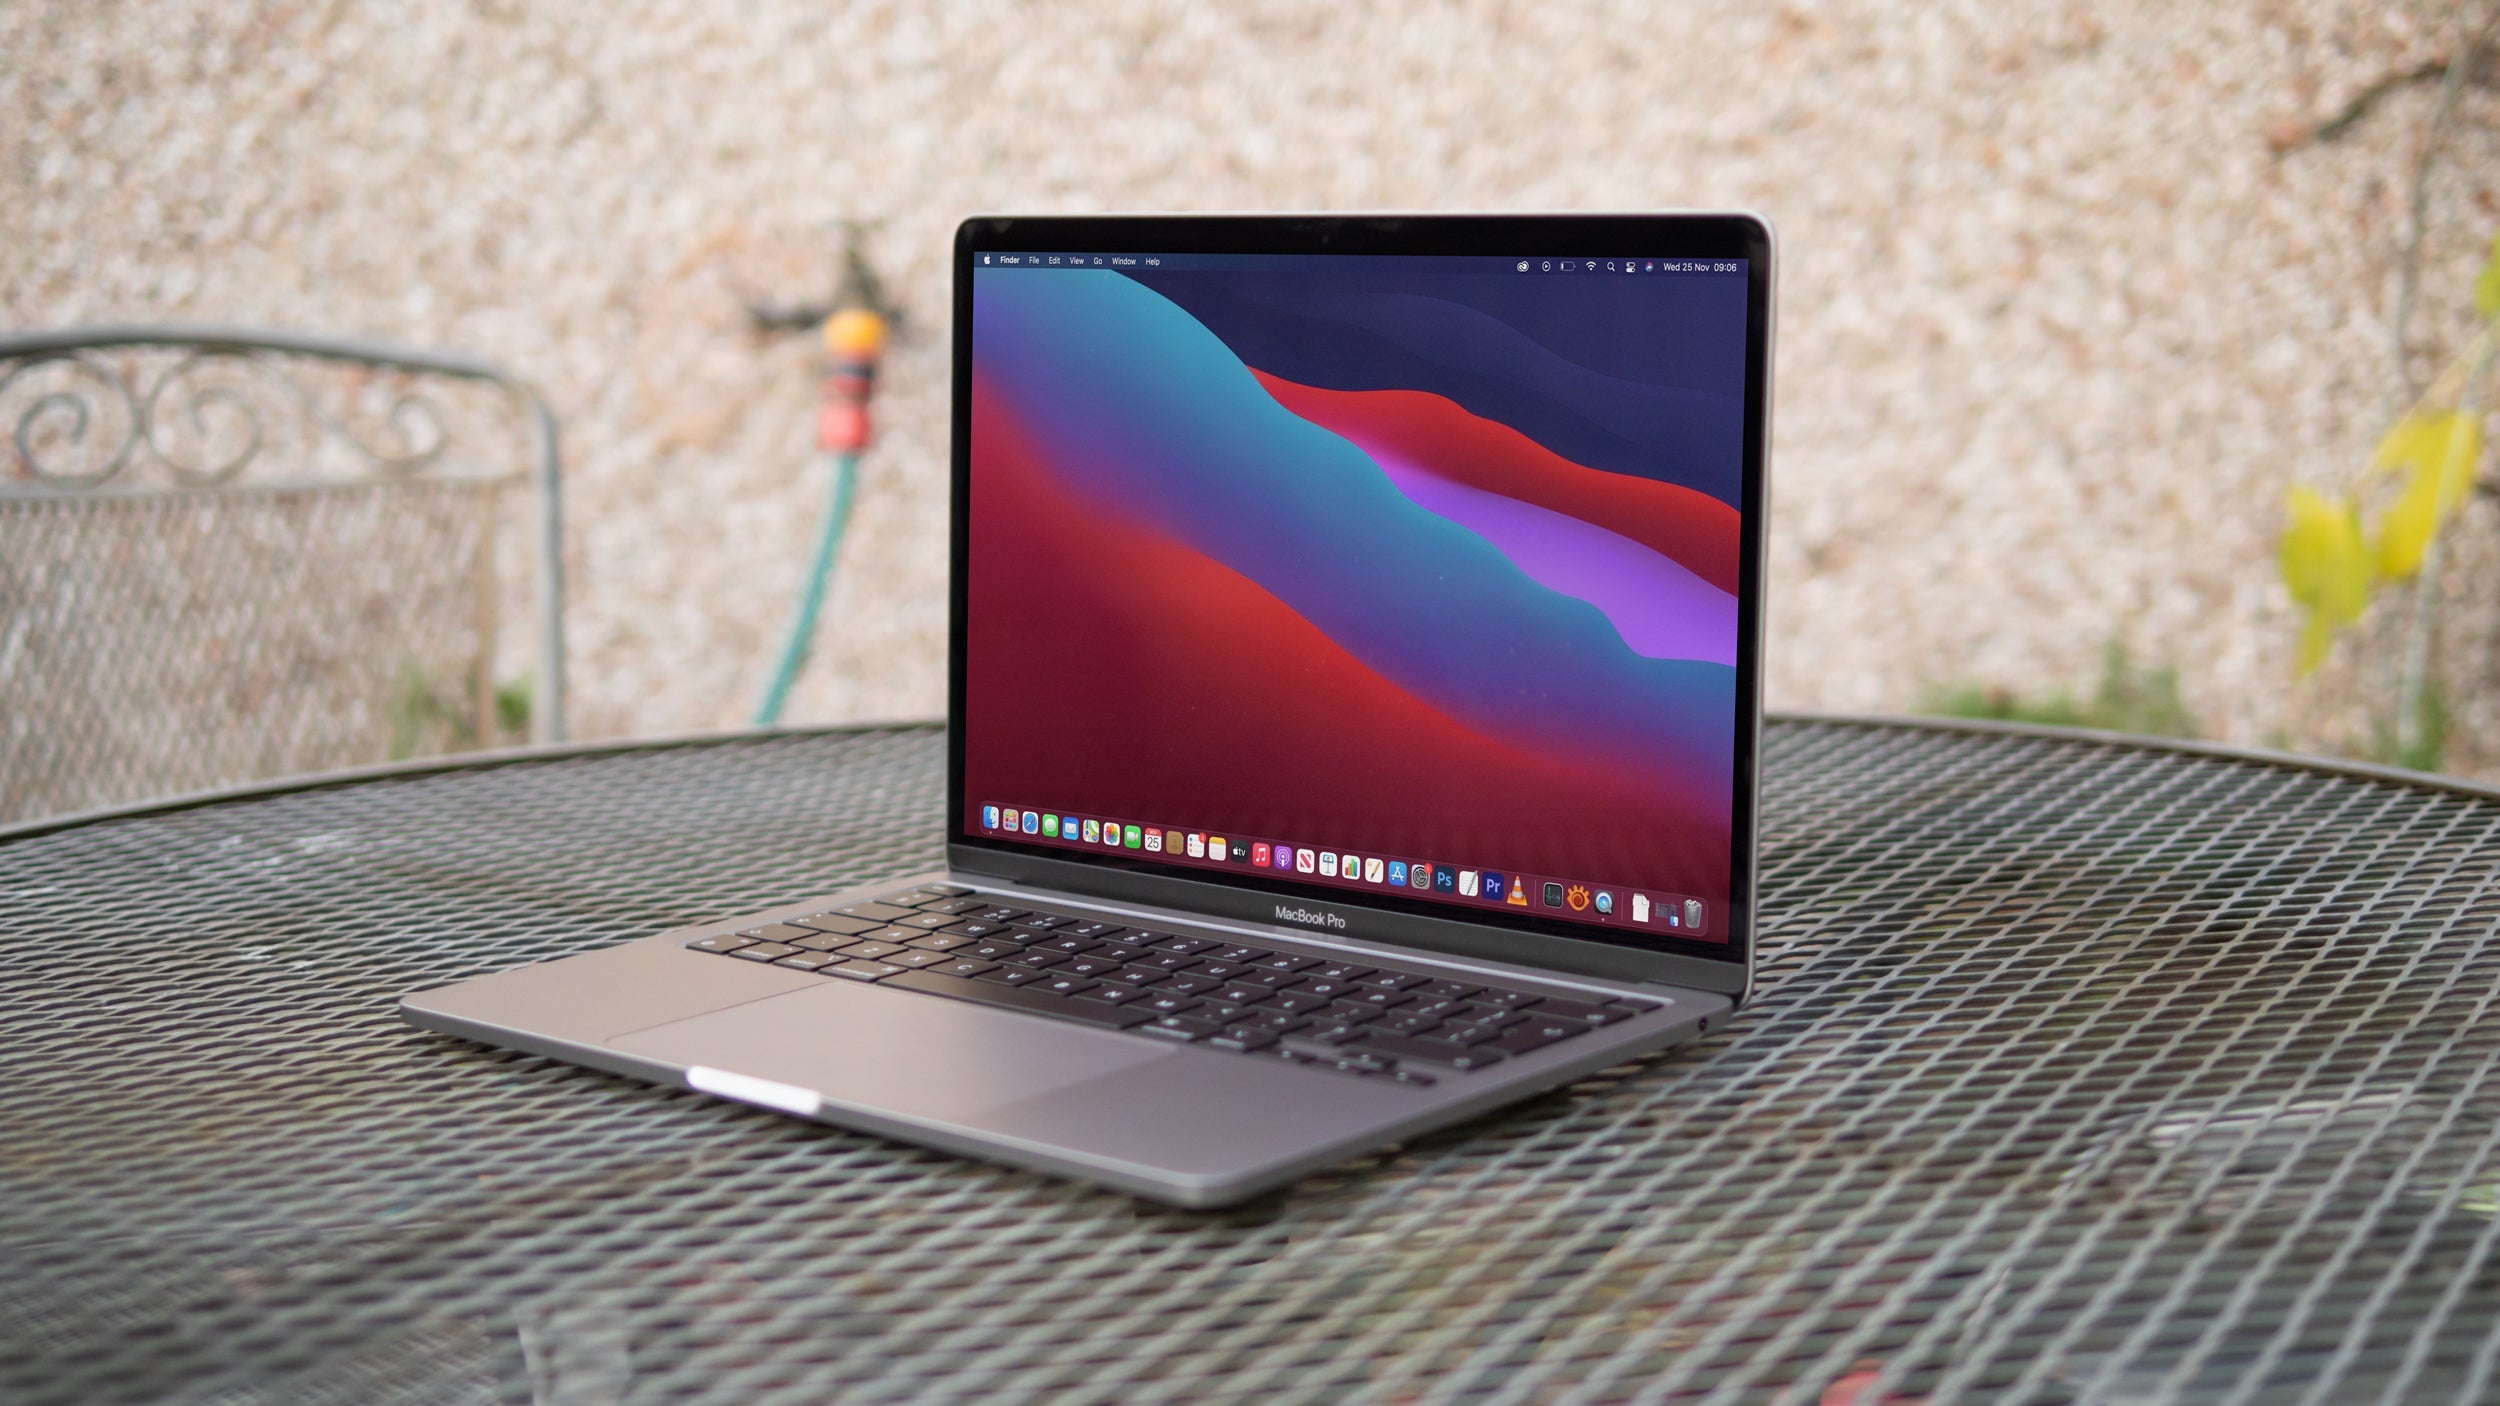 M1 Apple MacBook Pro 13in (2020) review: This laptop will change ...